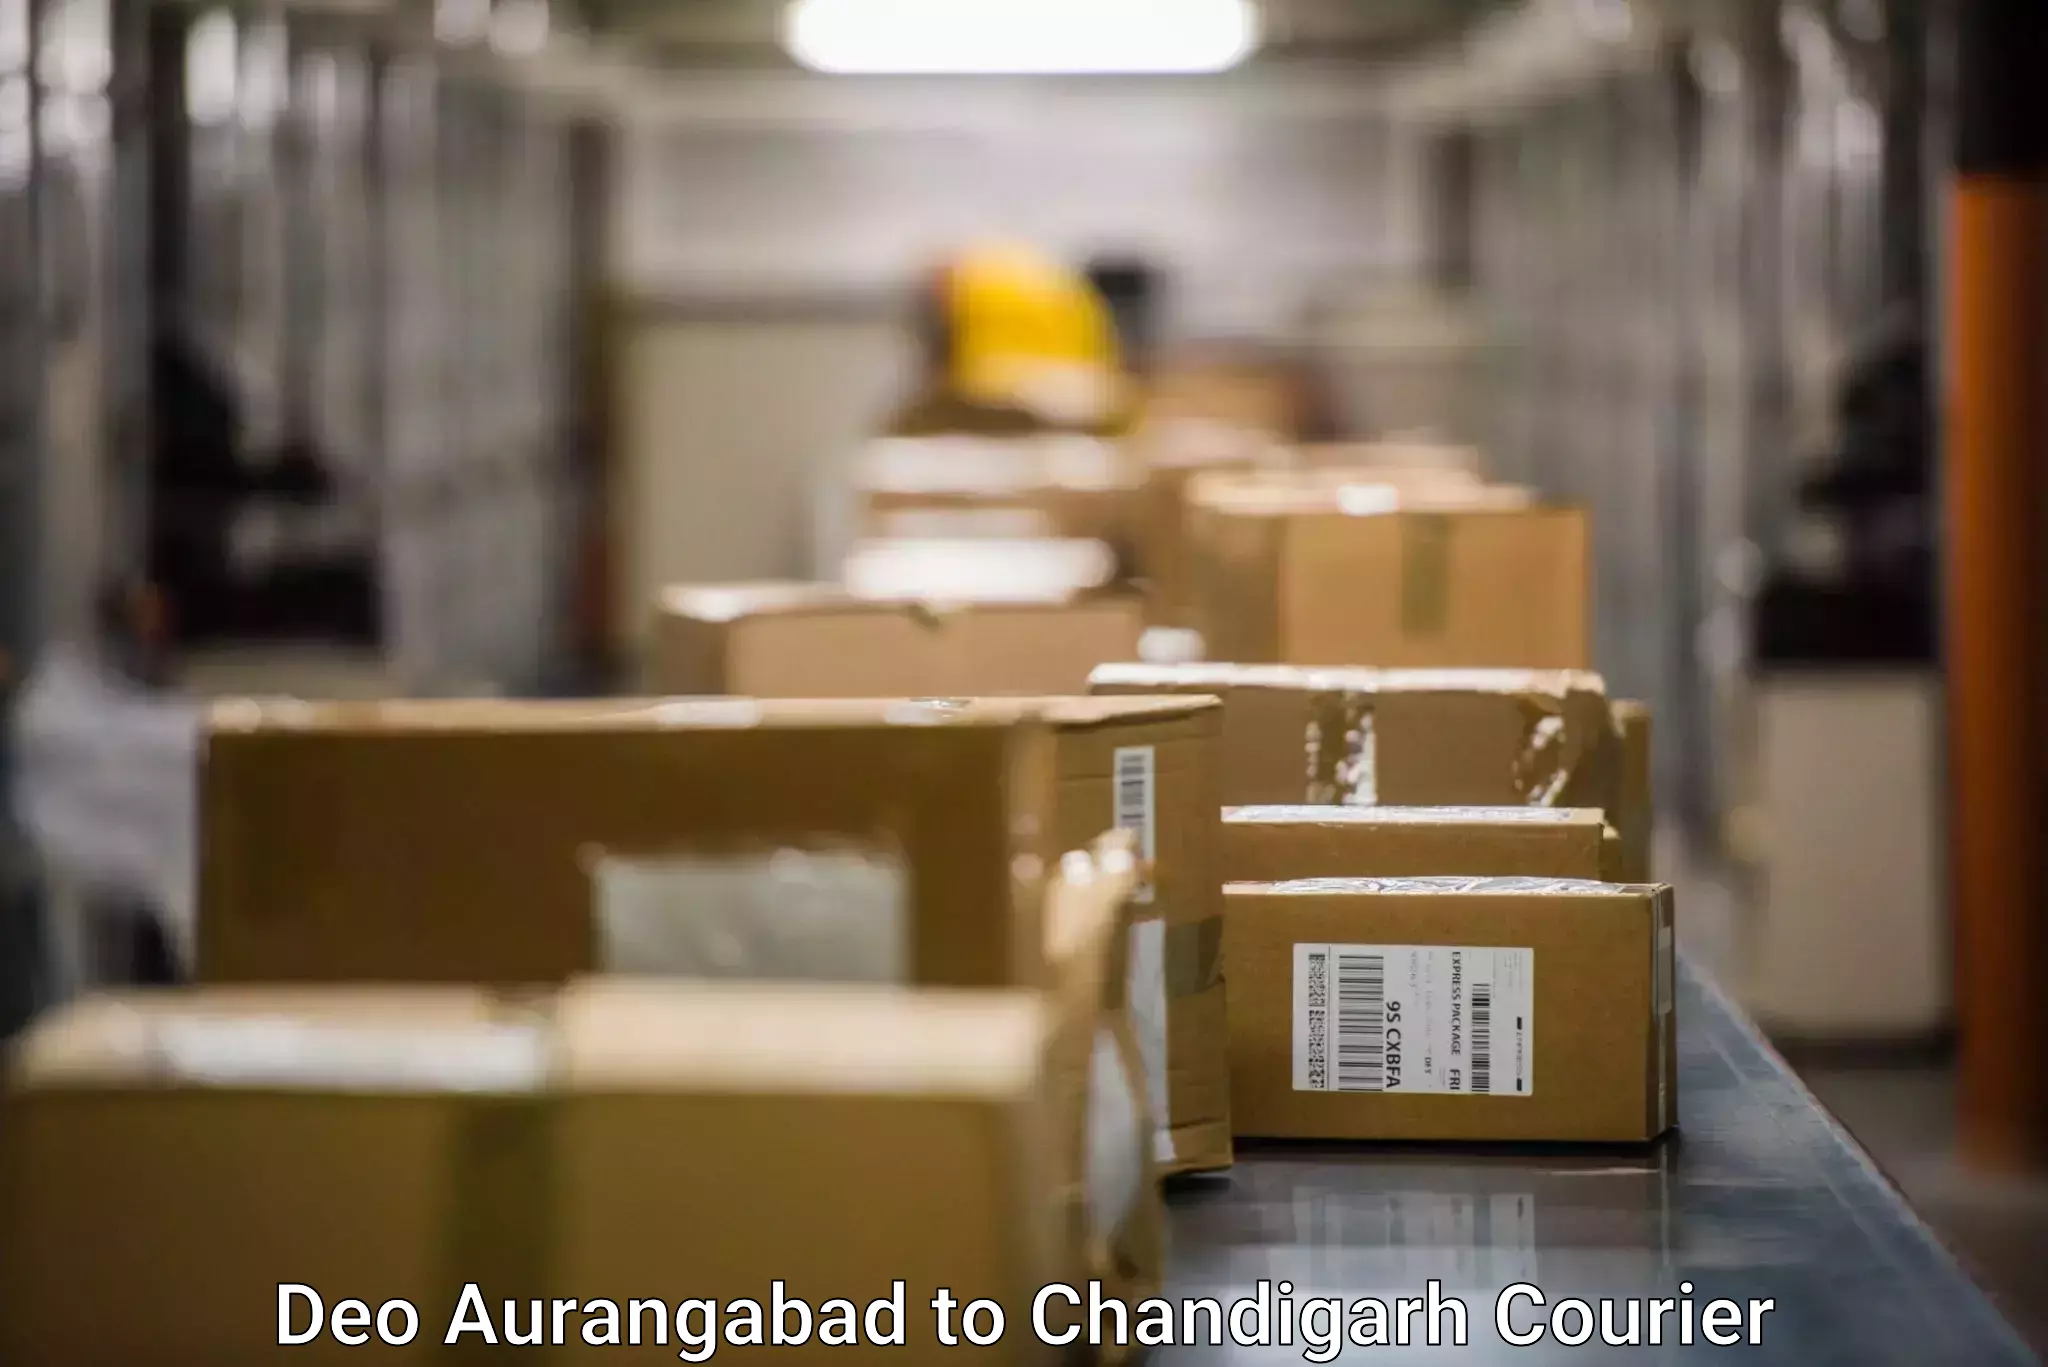 Advanced shipping services Deo Aurangabad to Chandigarh